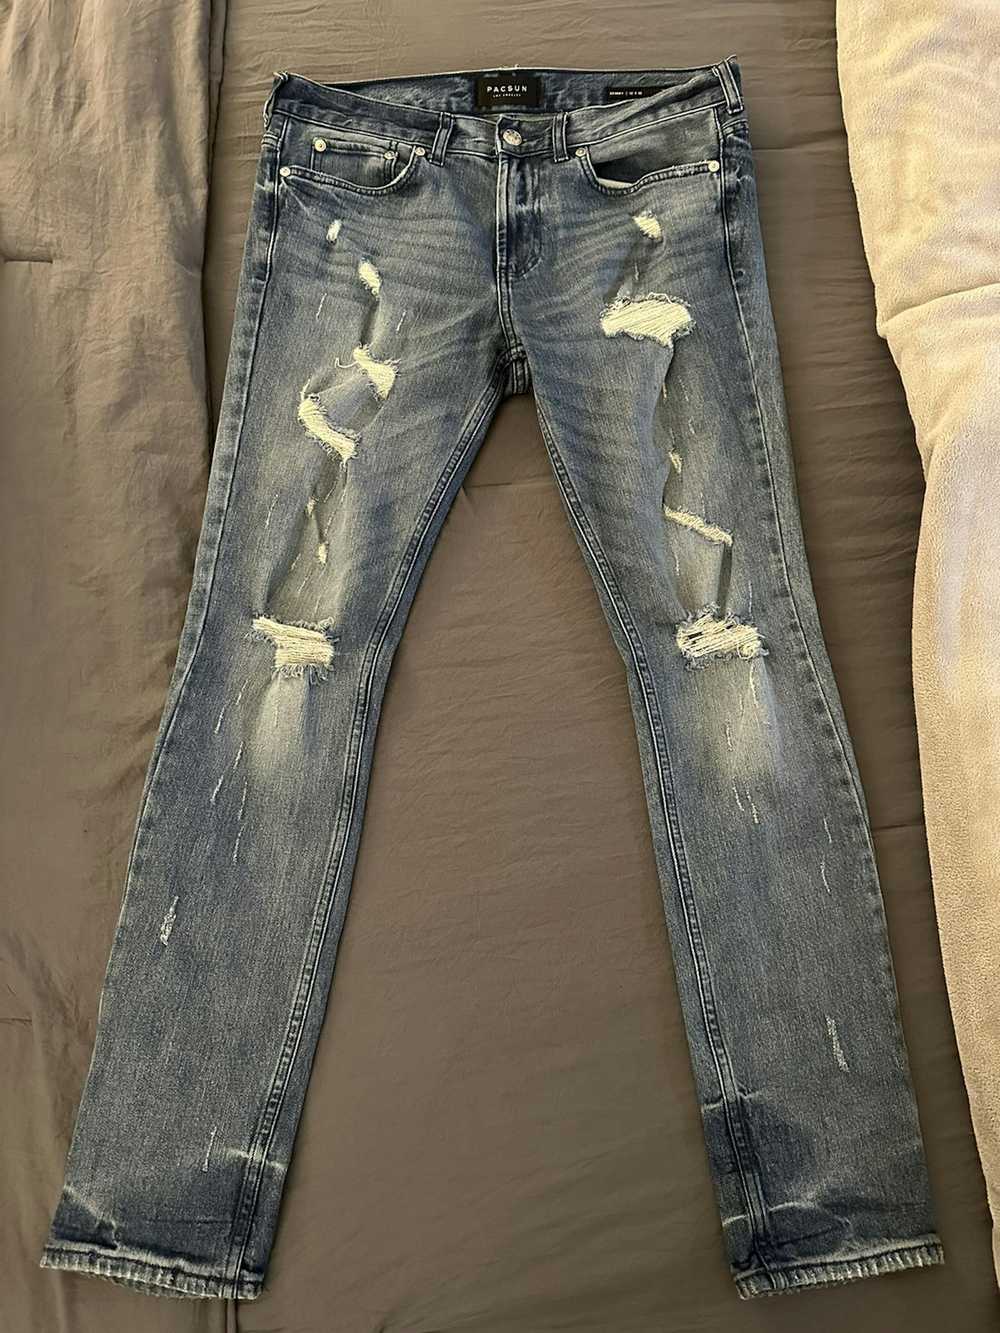 Pacsun Men’s Ripped Skinny Jeans - image 1